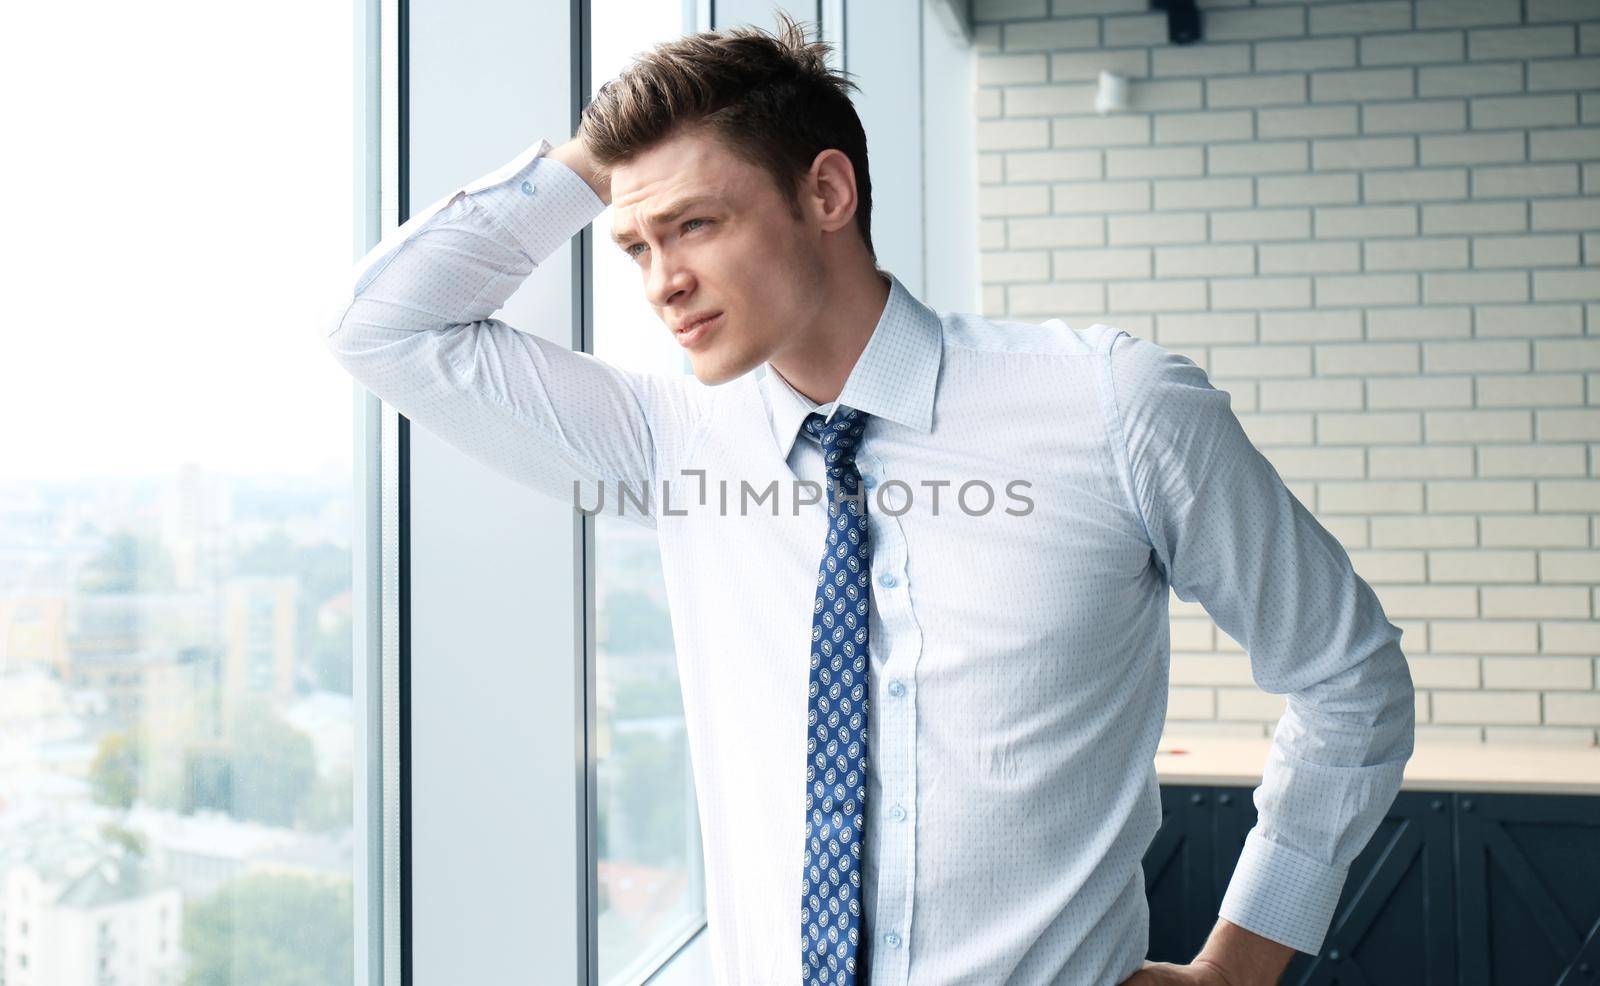 Young handsome businessman smiling in an office environment